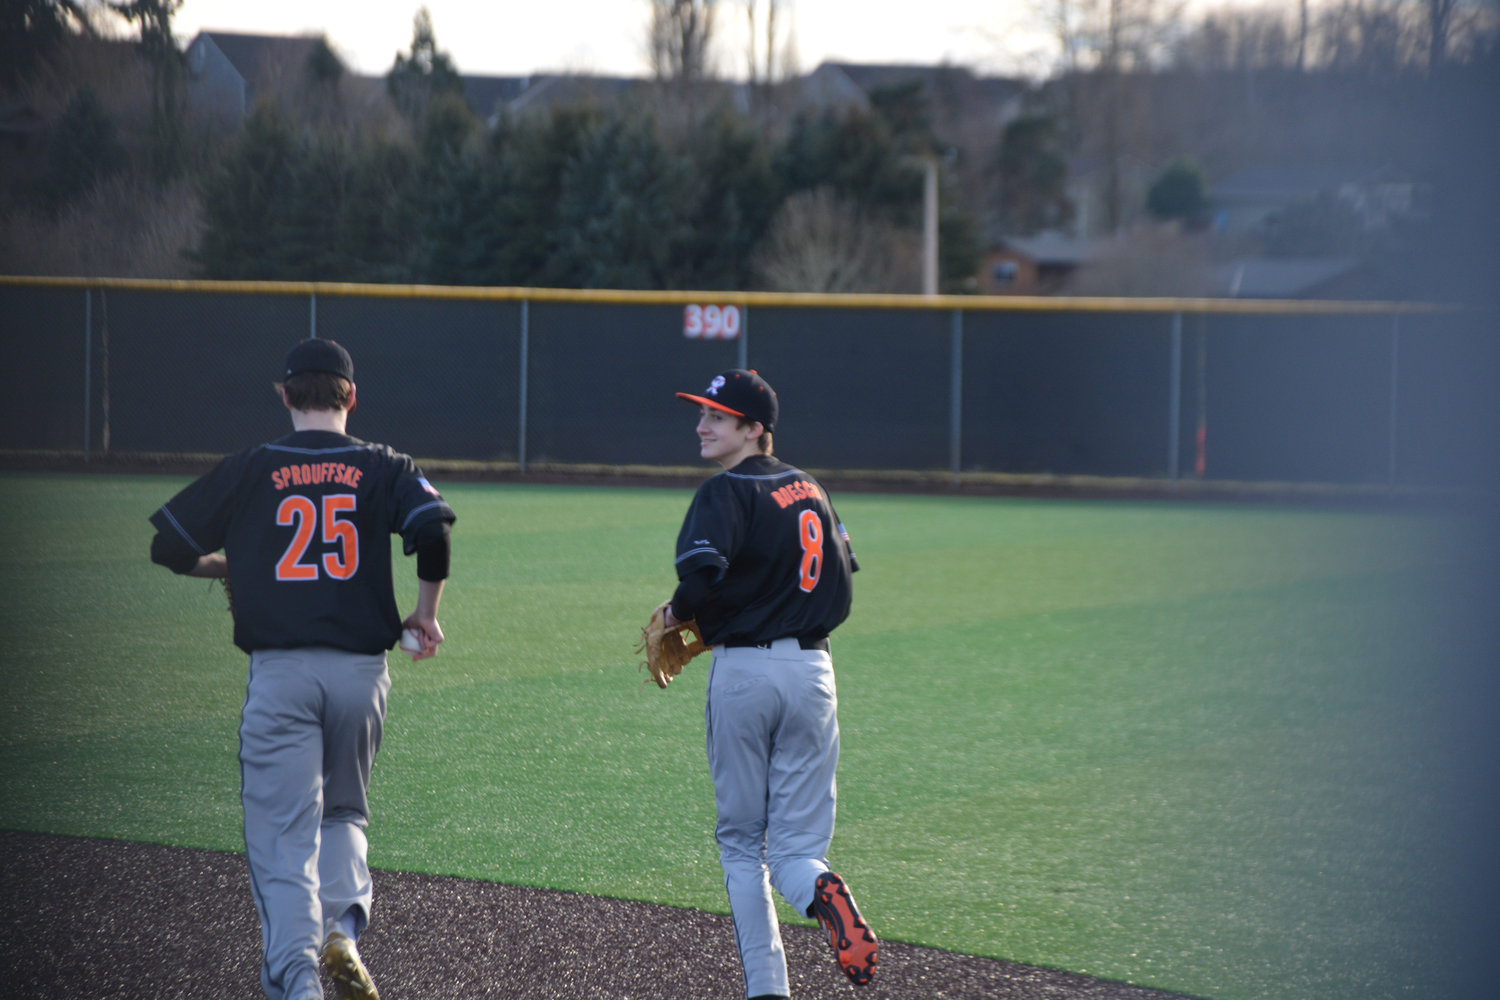 Rainier’s Jared Sprouffske and Johnny Boesch jog to the outfield to their defensive positions on Friday, March 10.